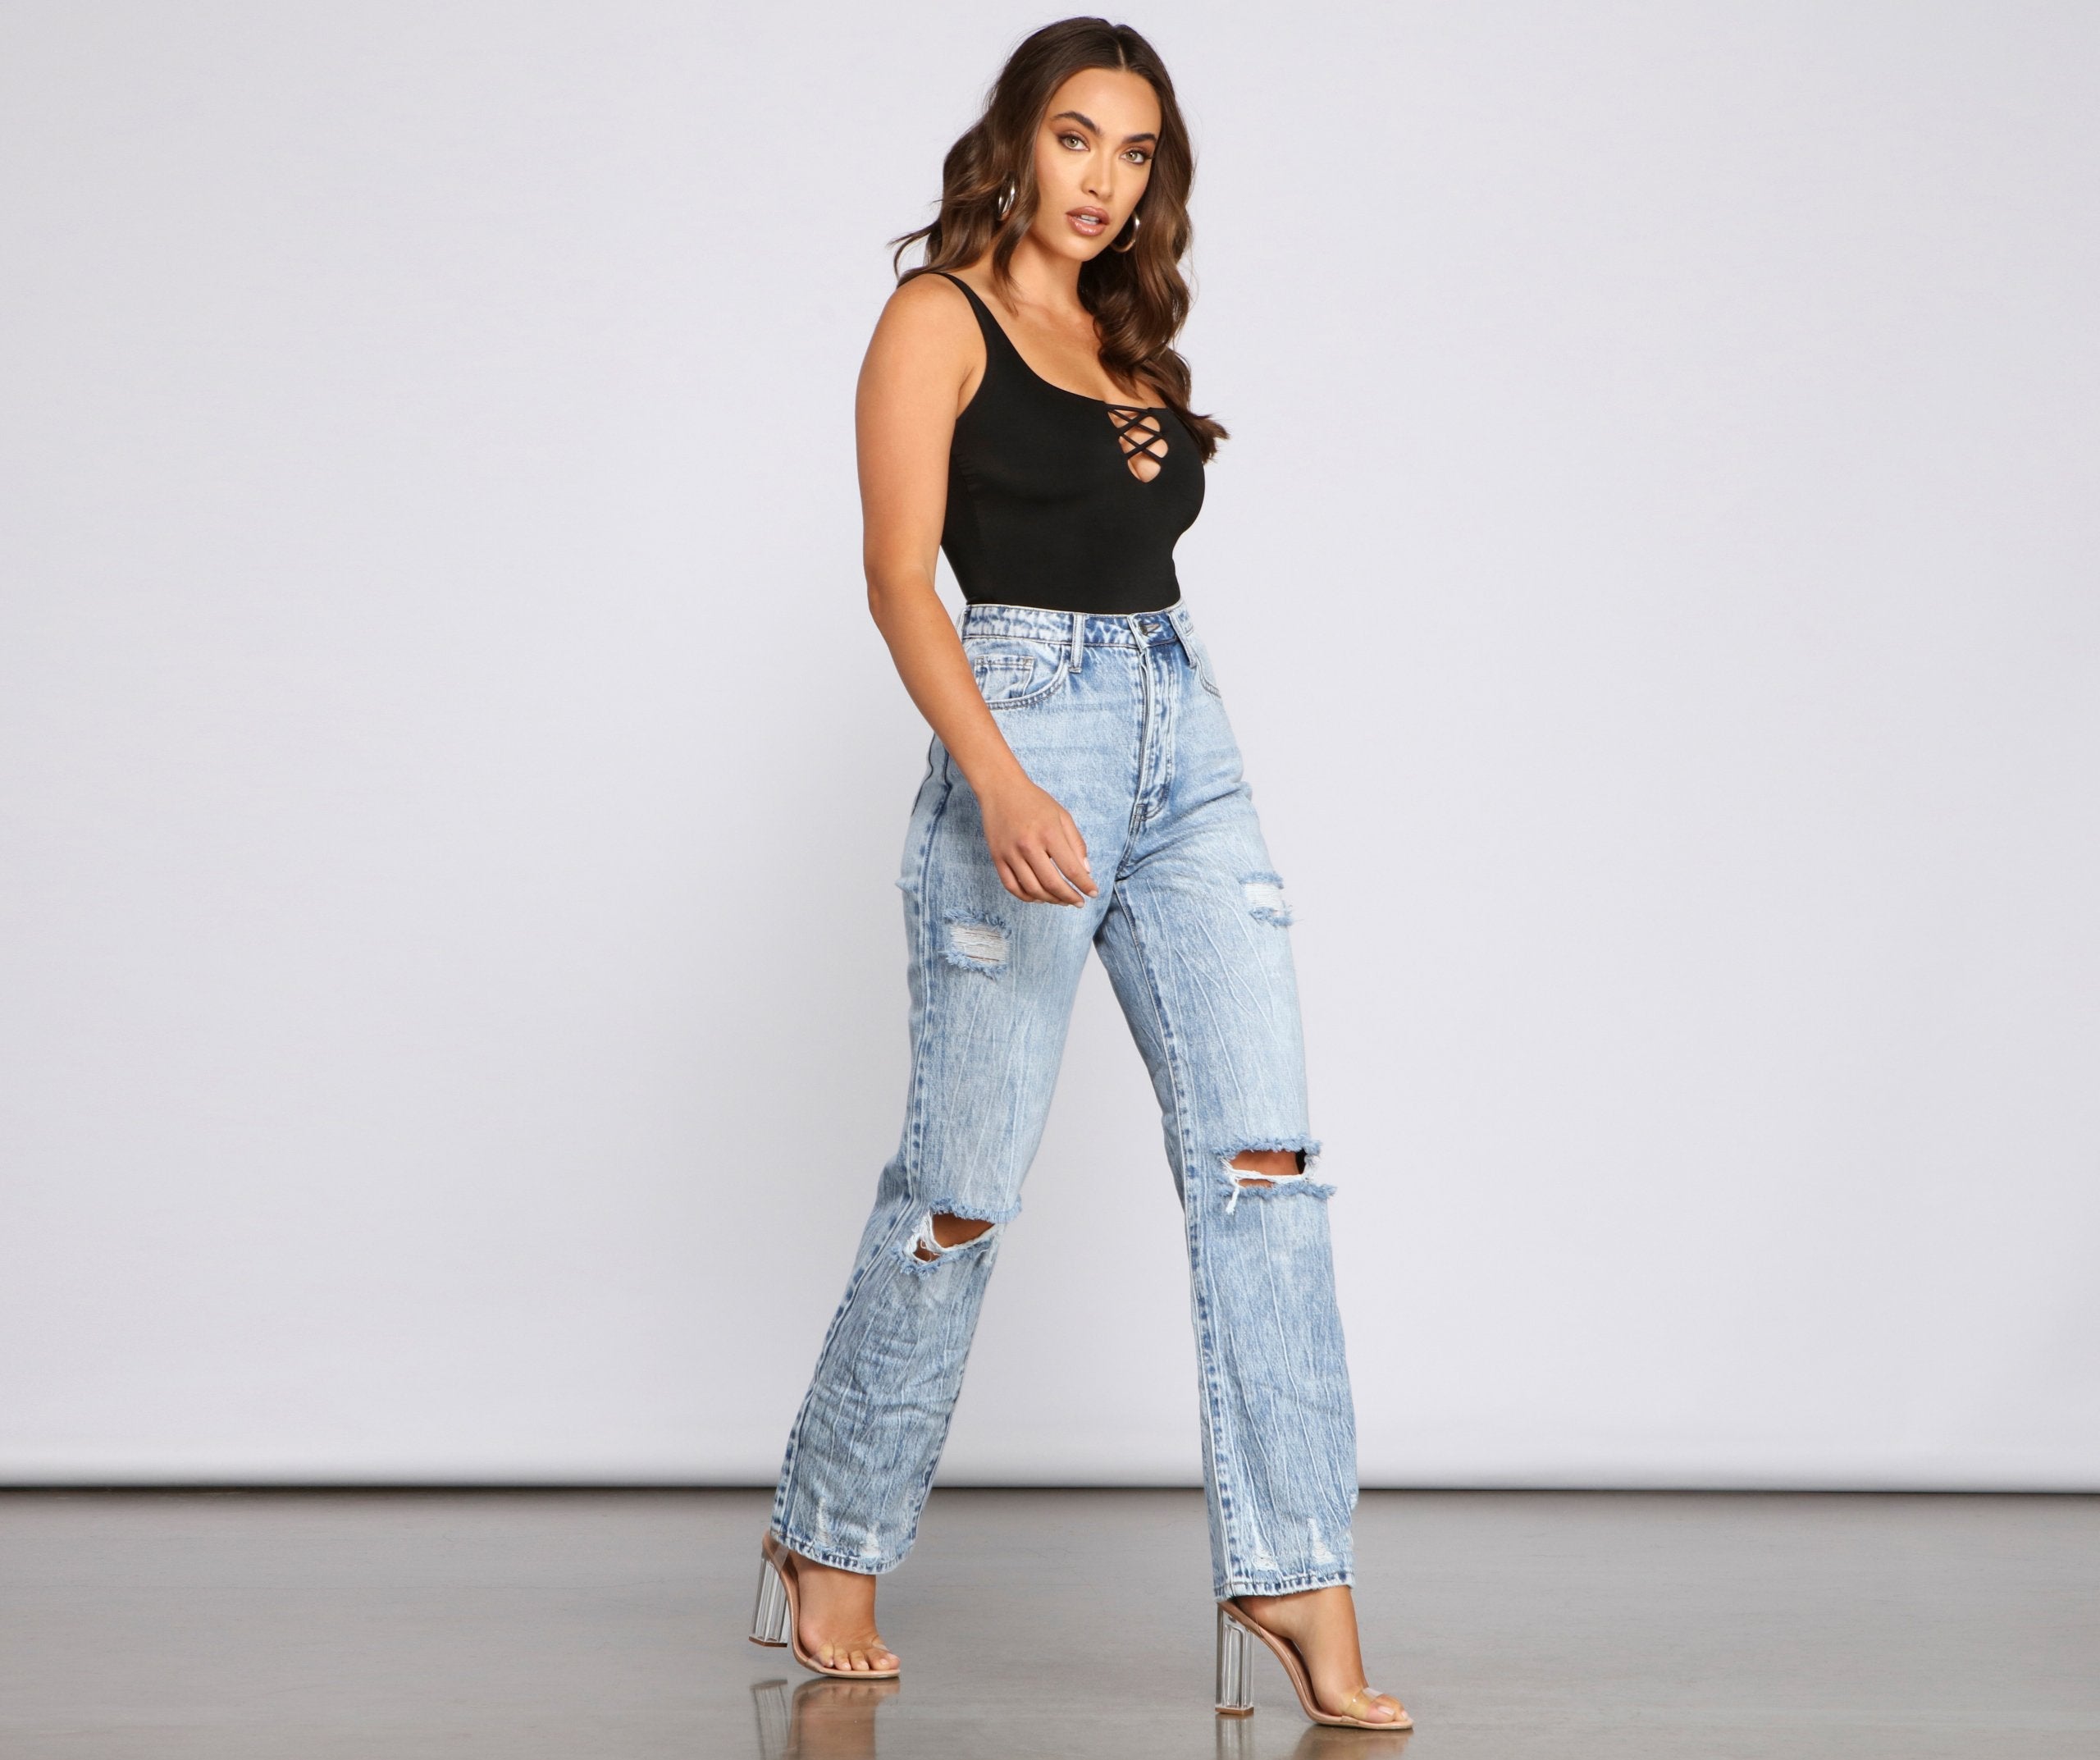 Effortless And Edgy Boyfriend Jeans - Lady Occasions